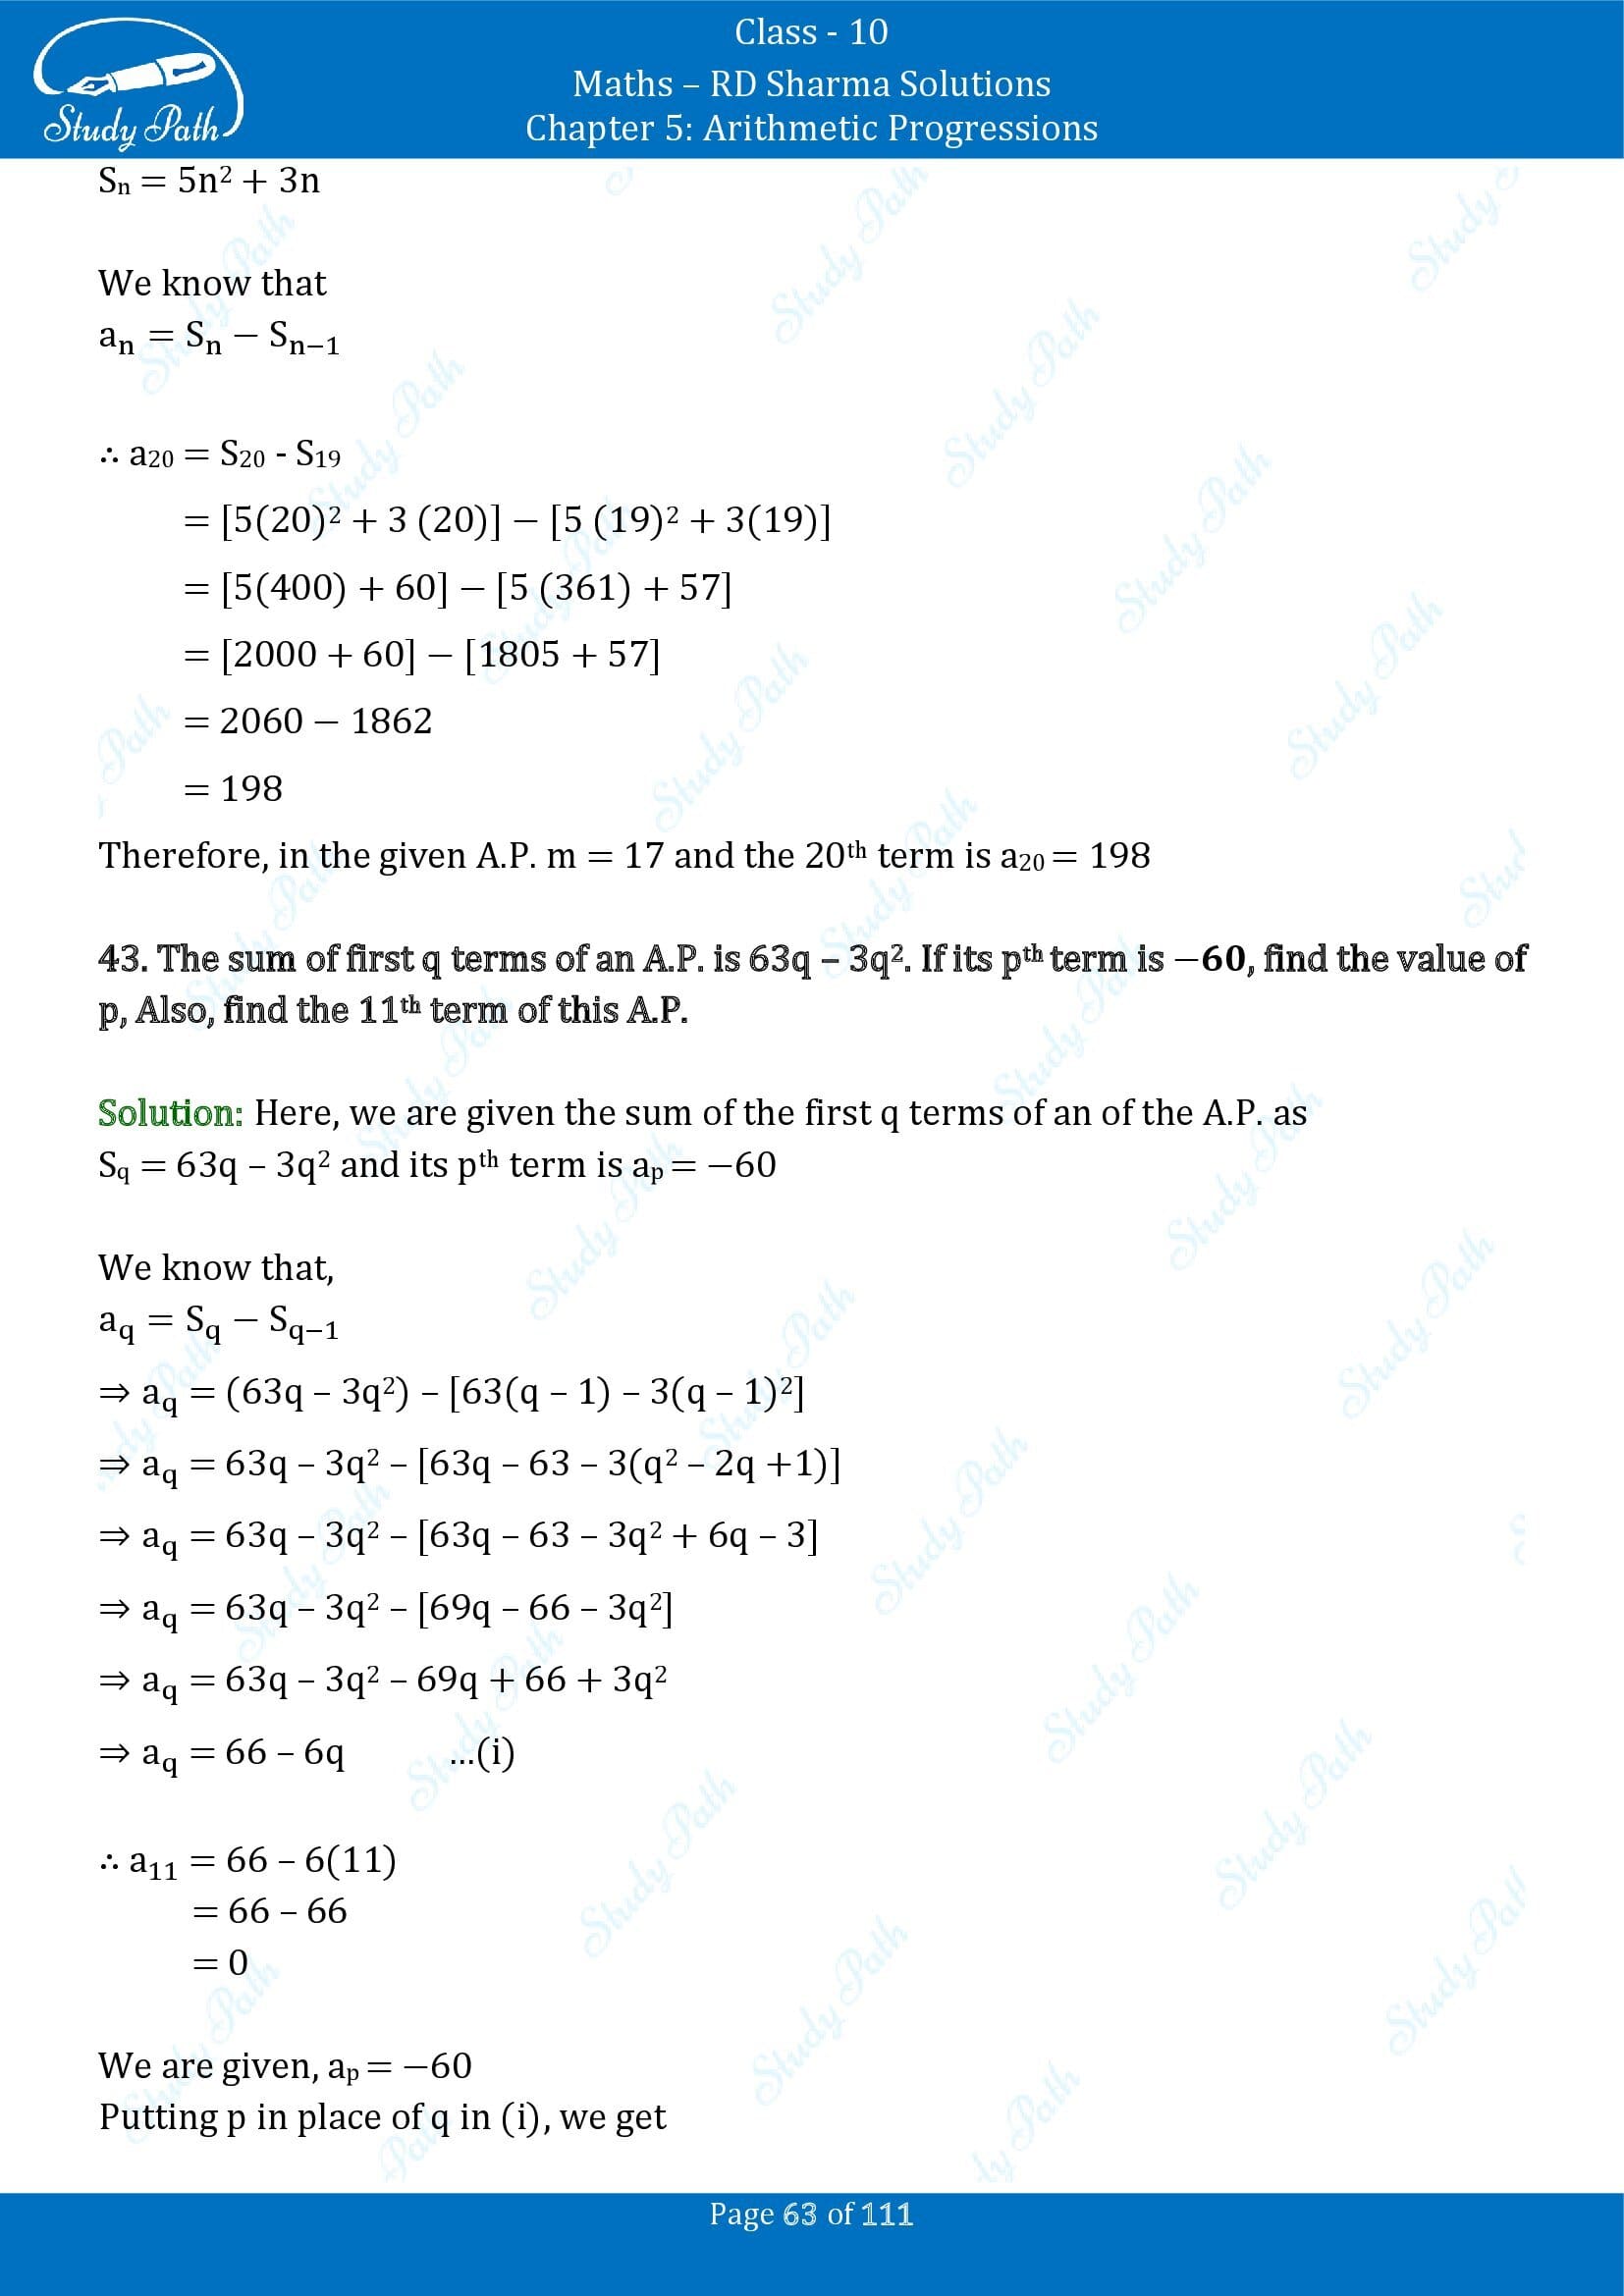 RD Sharma Solutions Class 10 Chapter 5 Arithmetic Progressions Exercise 5.6 00063